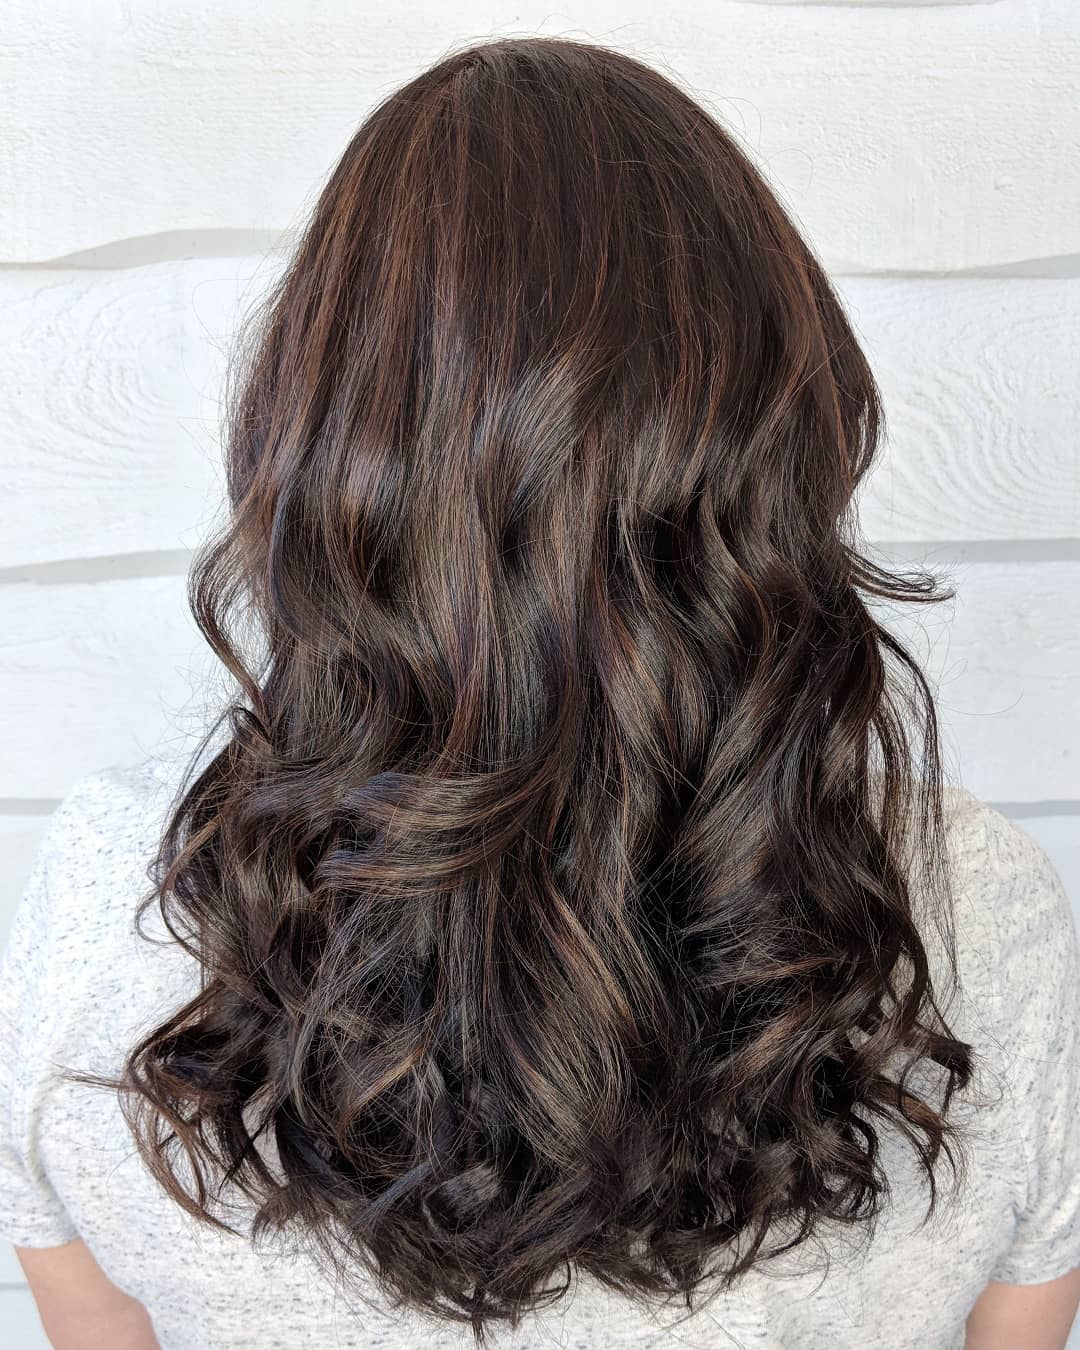 Woman with medium length curly brunette hair with mahogany highlights